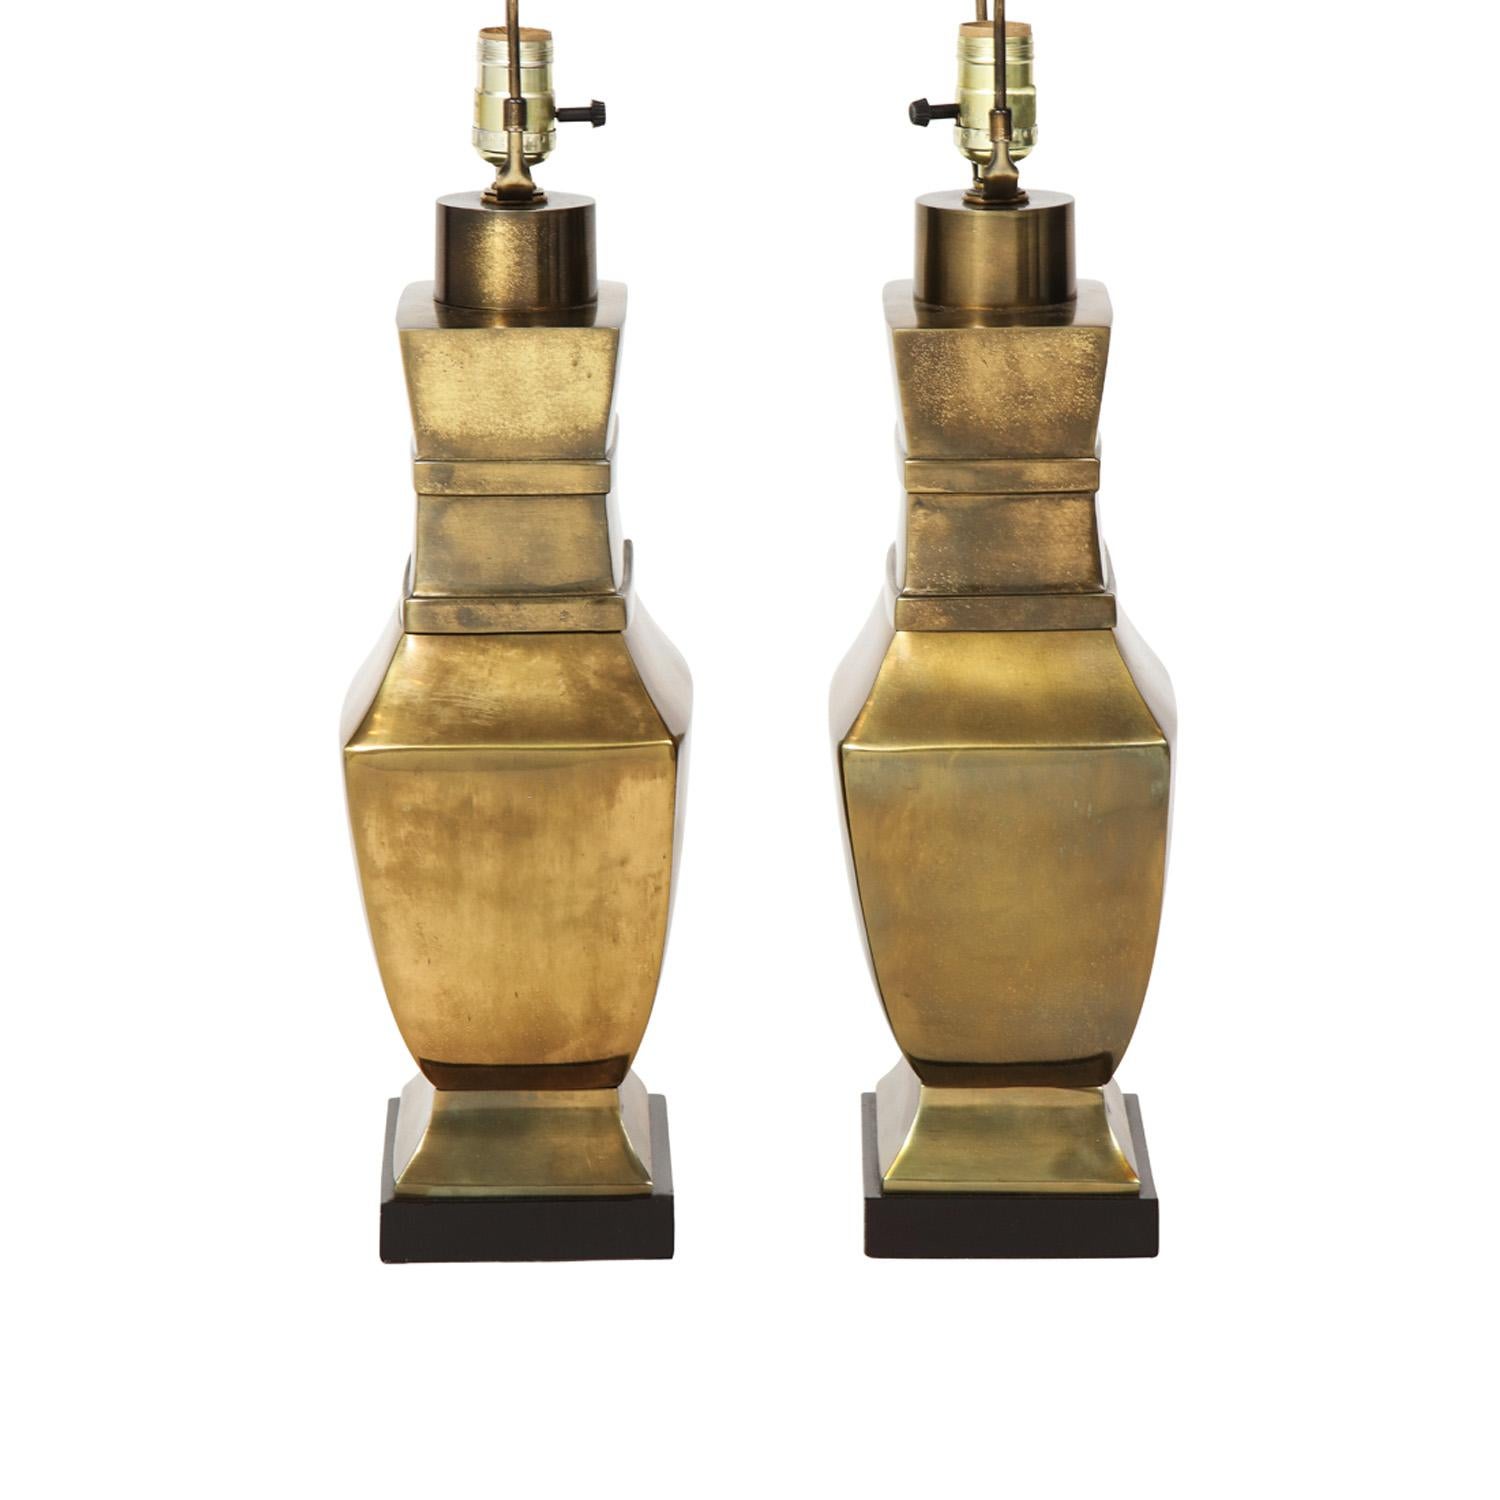 Hand-Crafted Paul Hanson Neoclassical Table Lamps in Bronze, 1950s For Sale